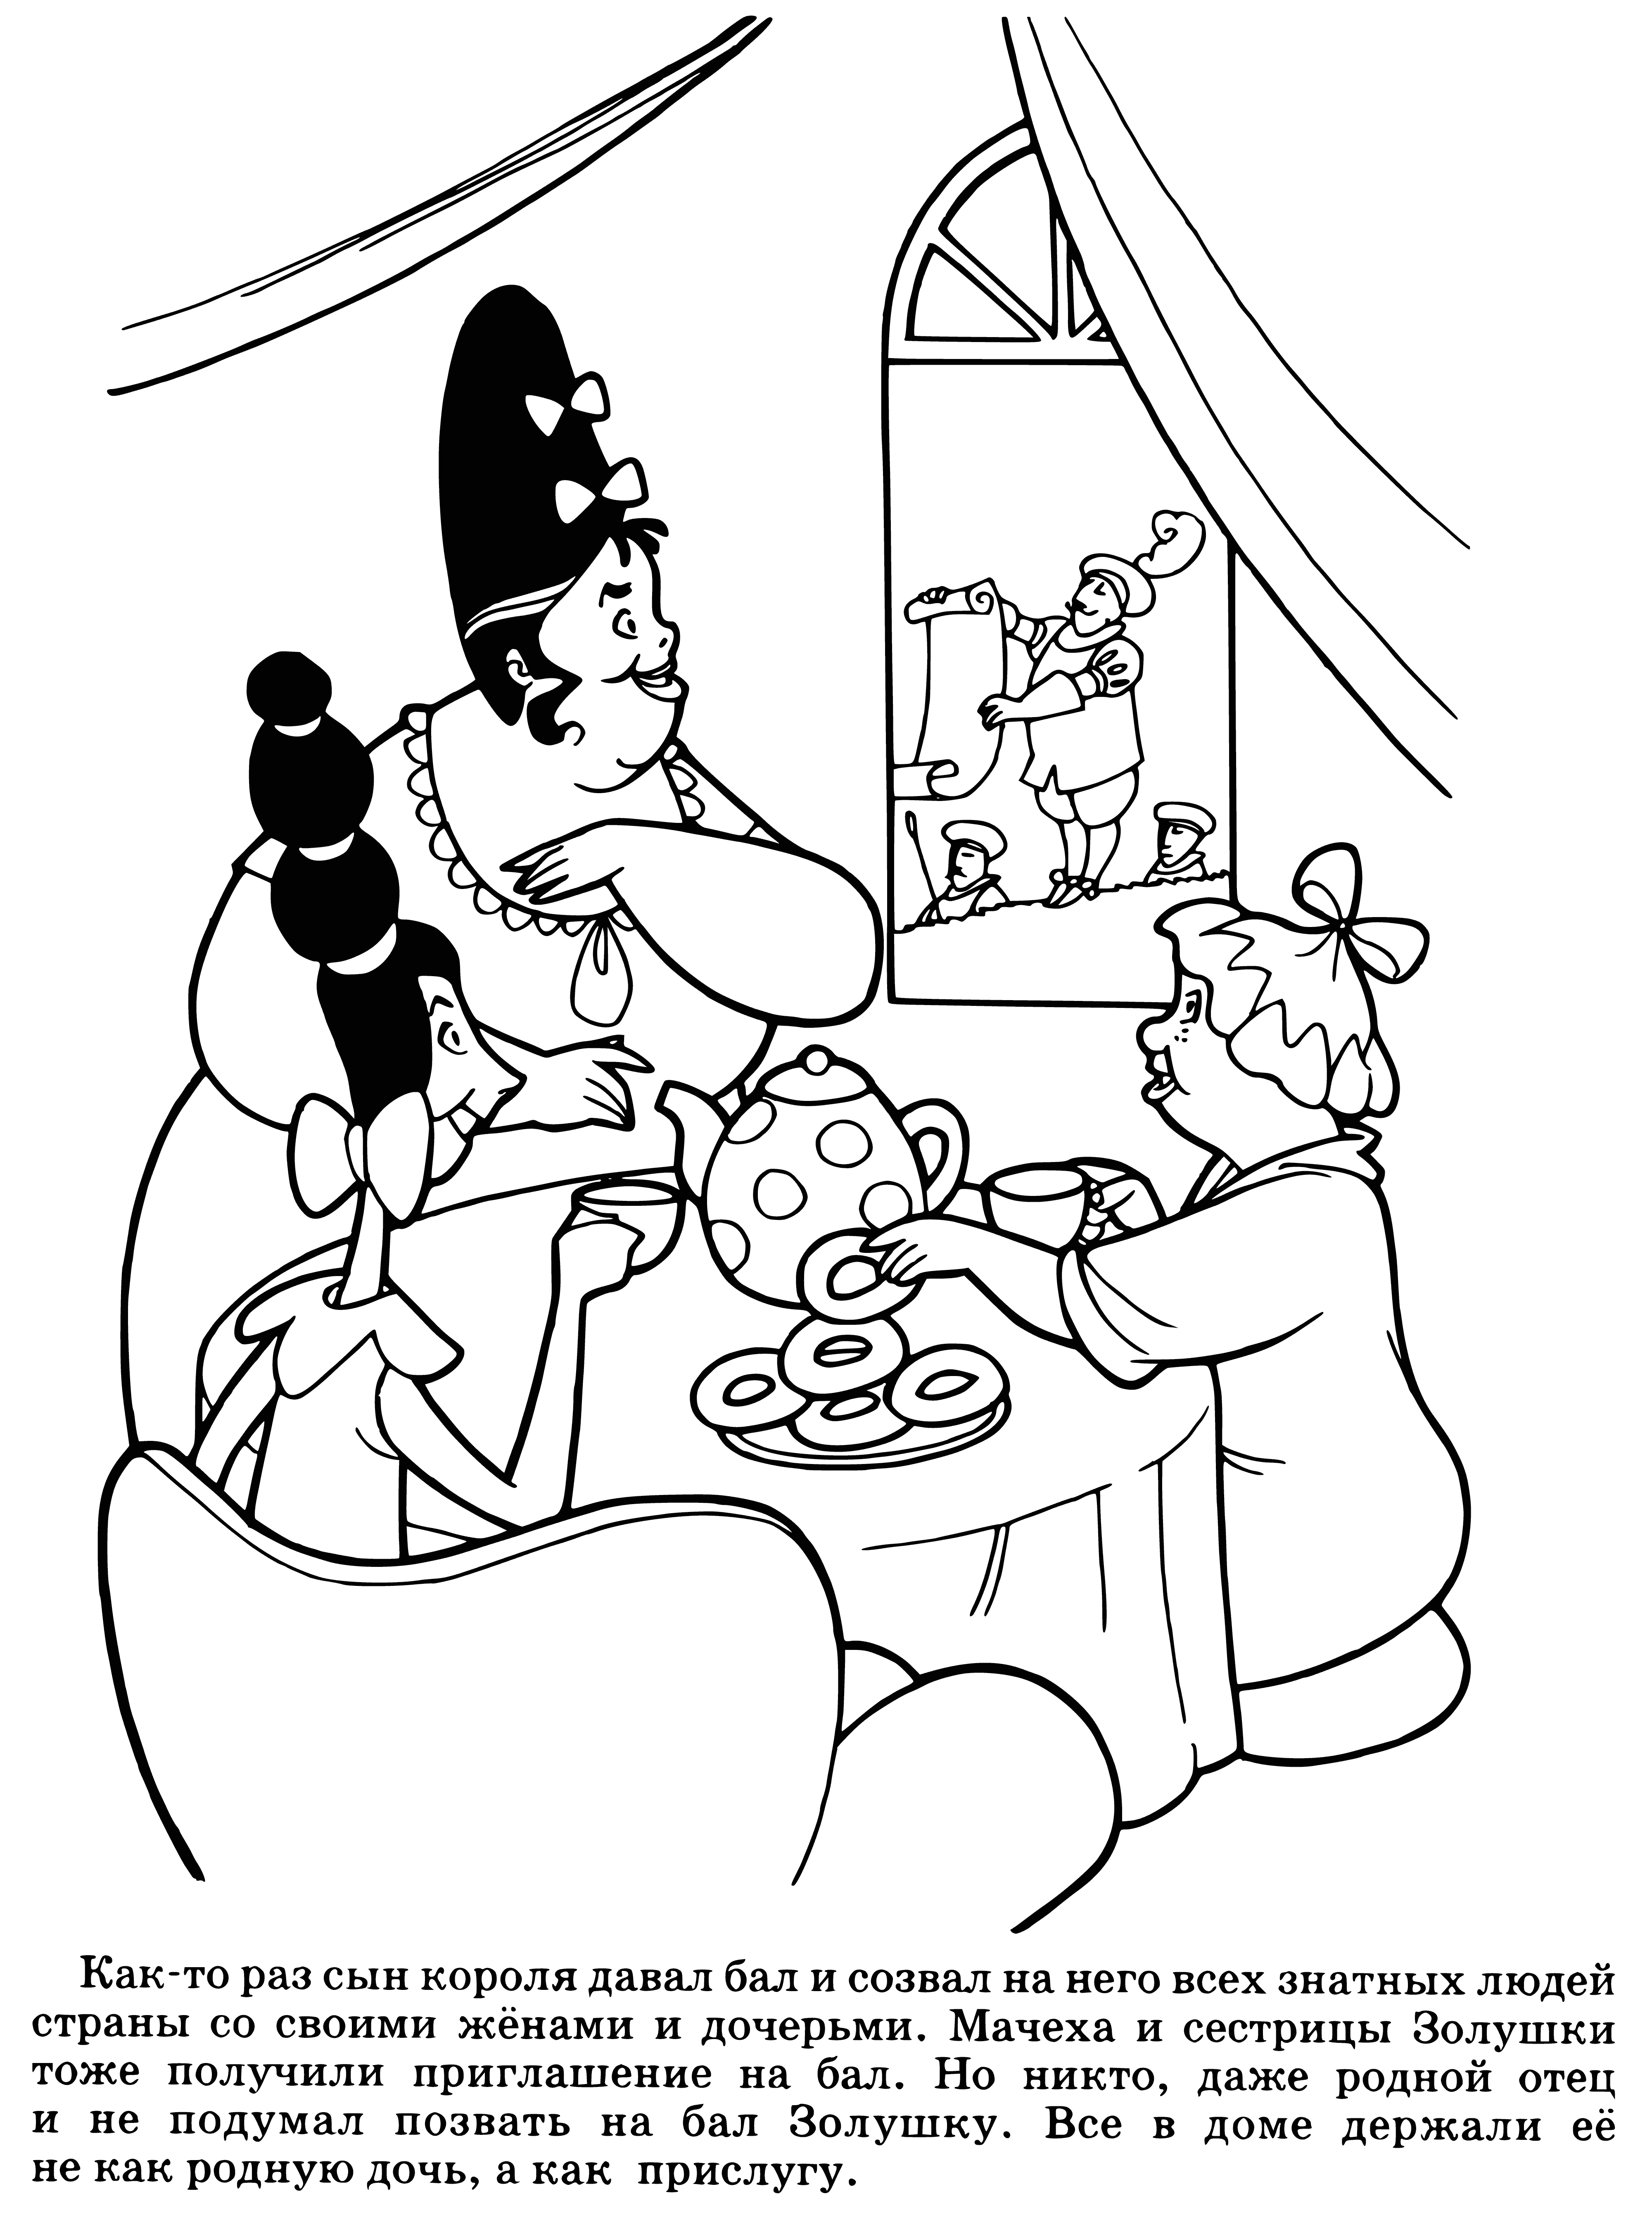 coloring page: He won't attend the ball, she pleads to him but he's insistent he won't go; crystal ball separating them as her plea goes unheeded.